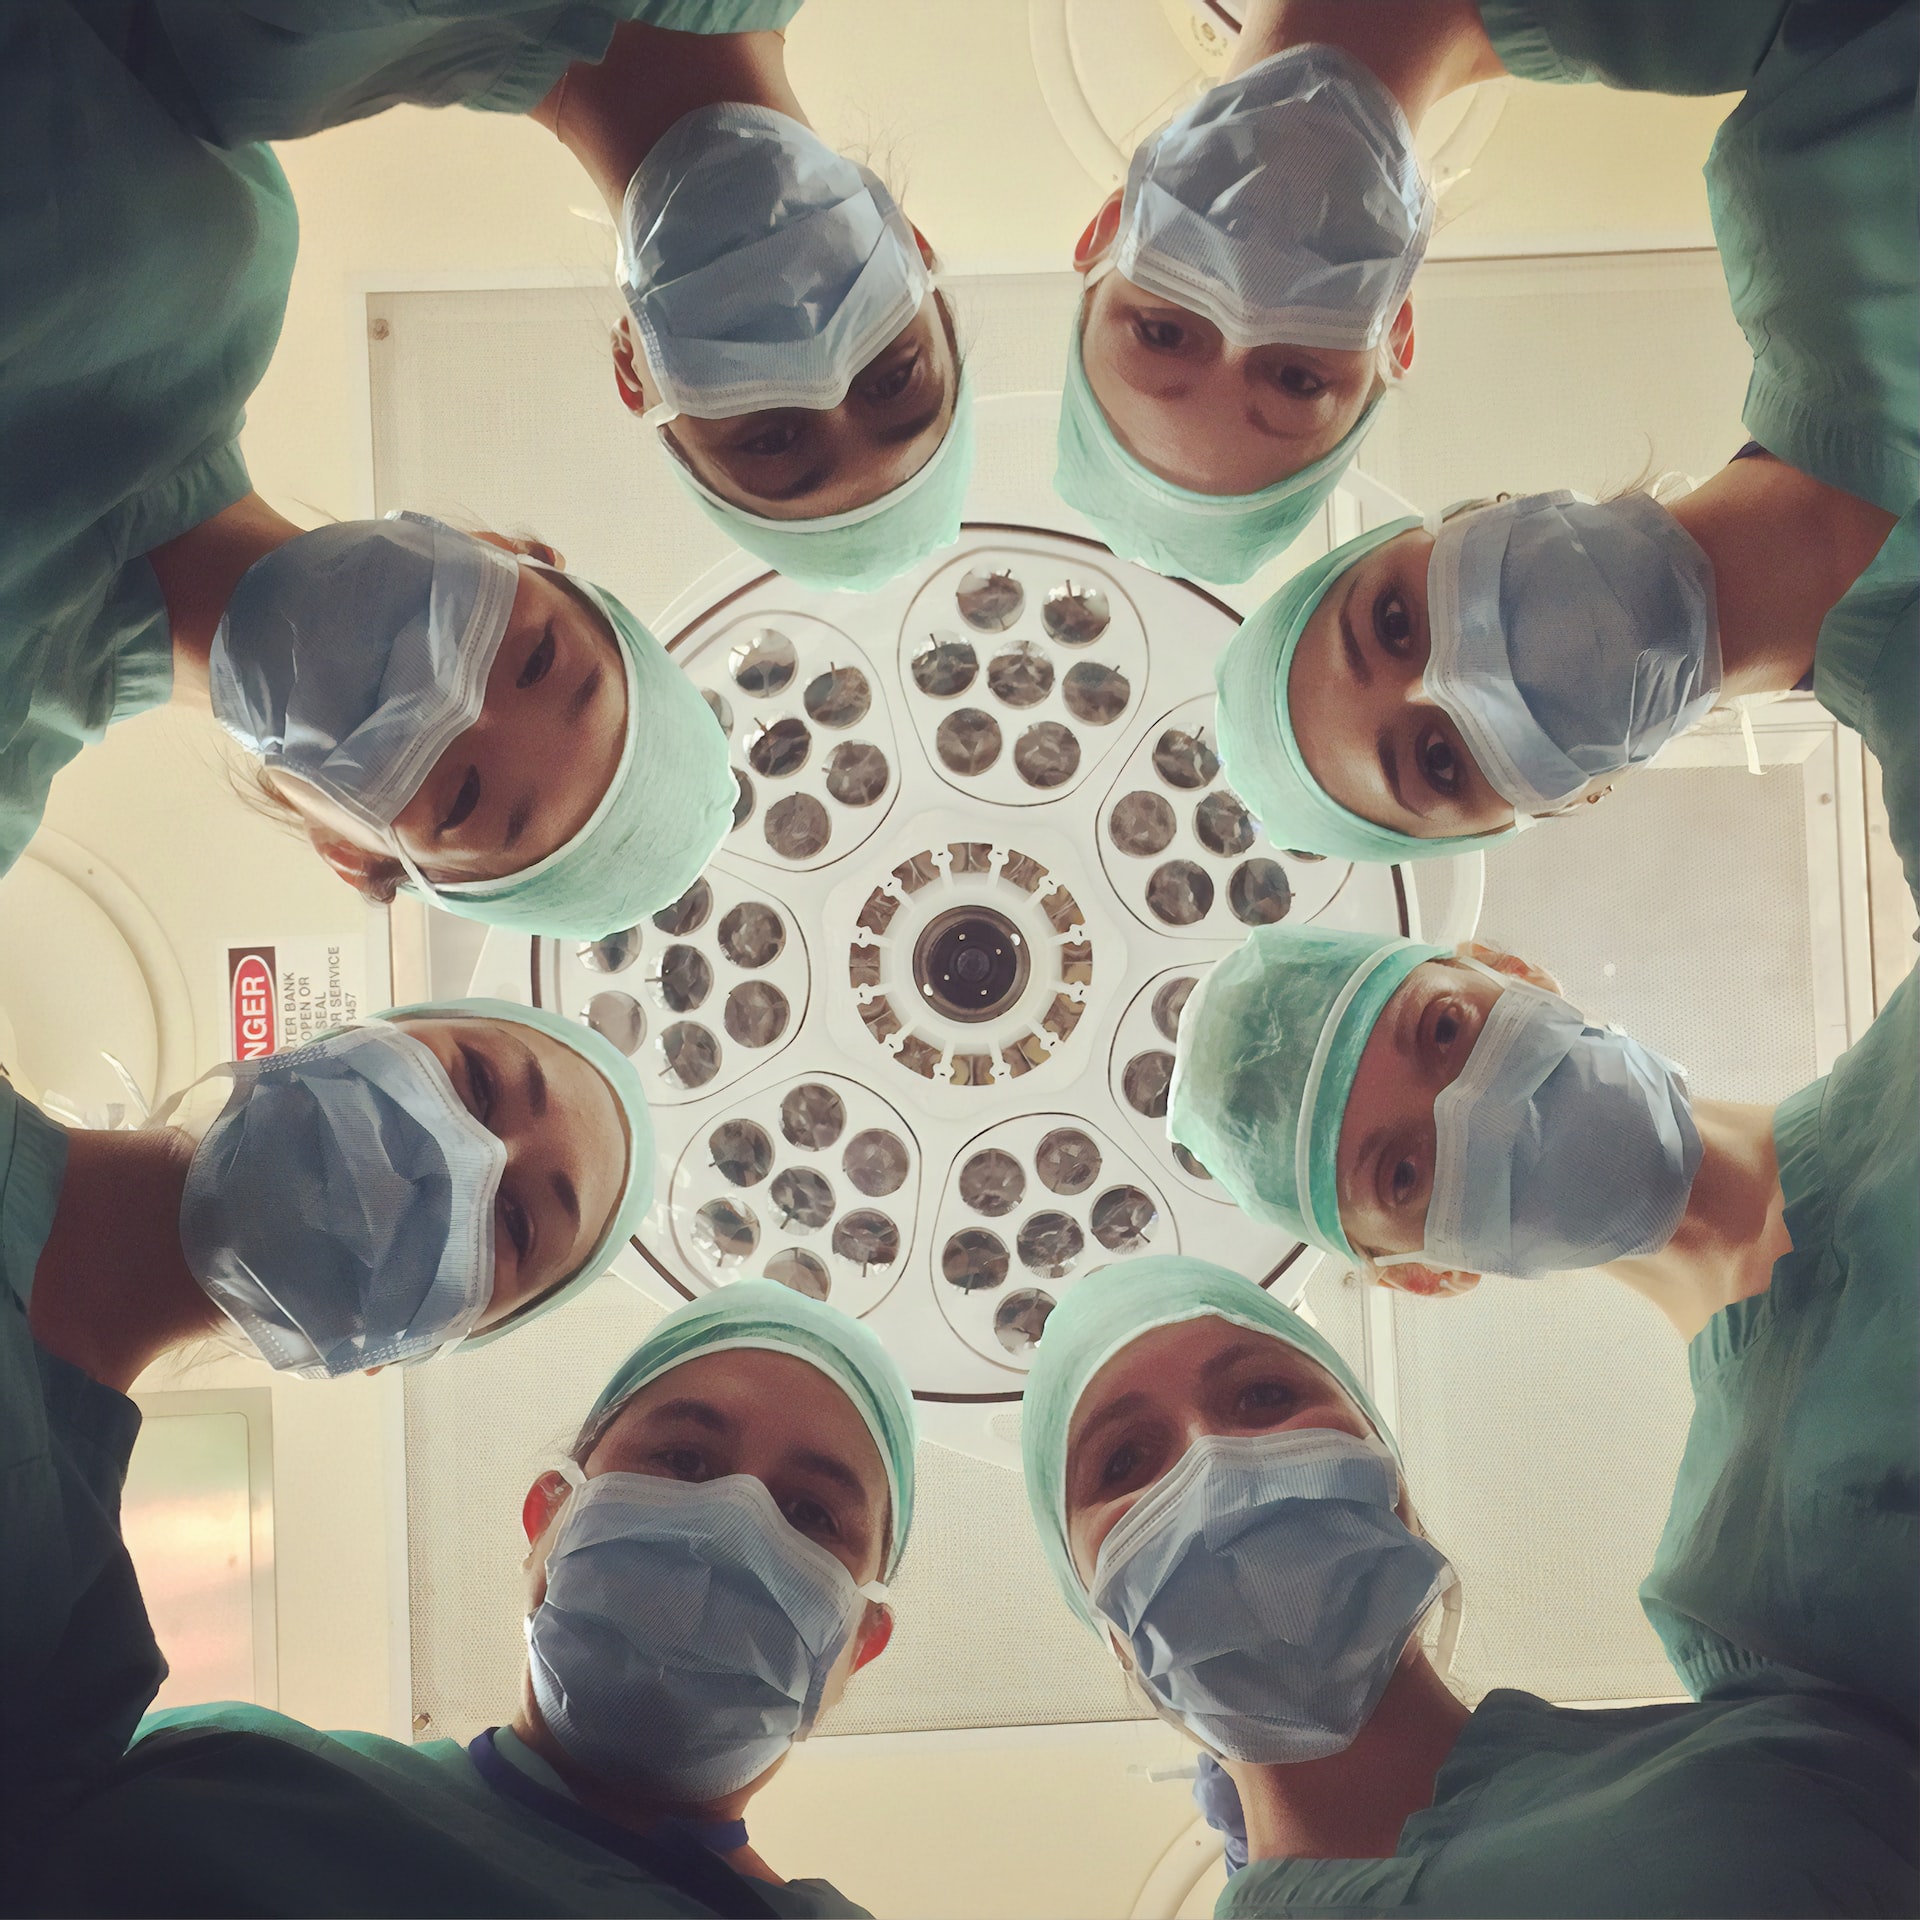 surgeons looking down at a patient